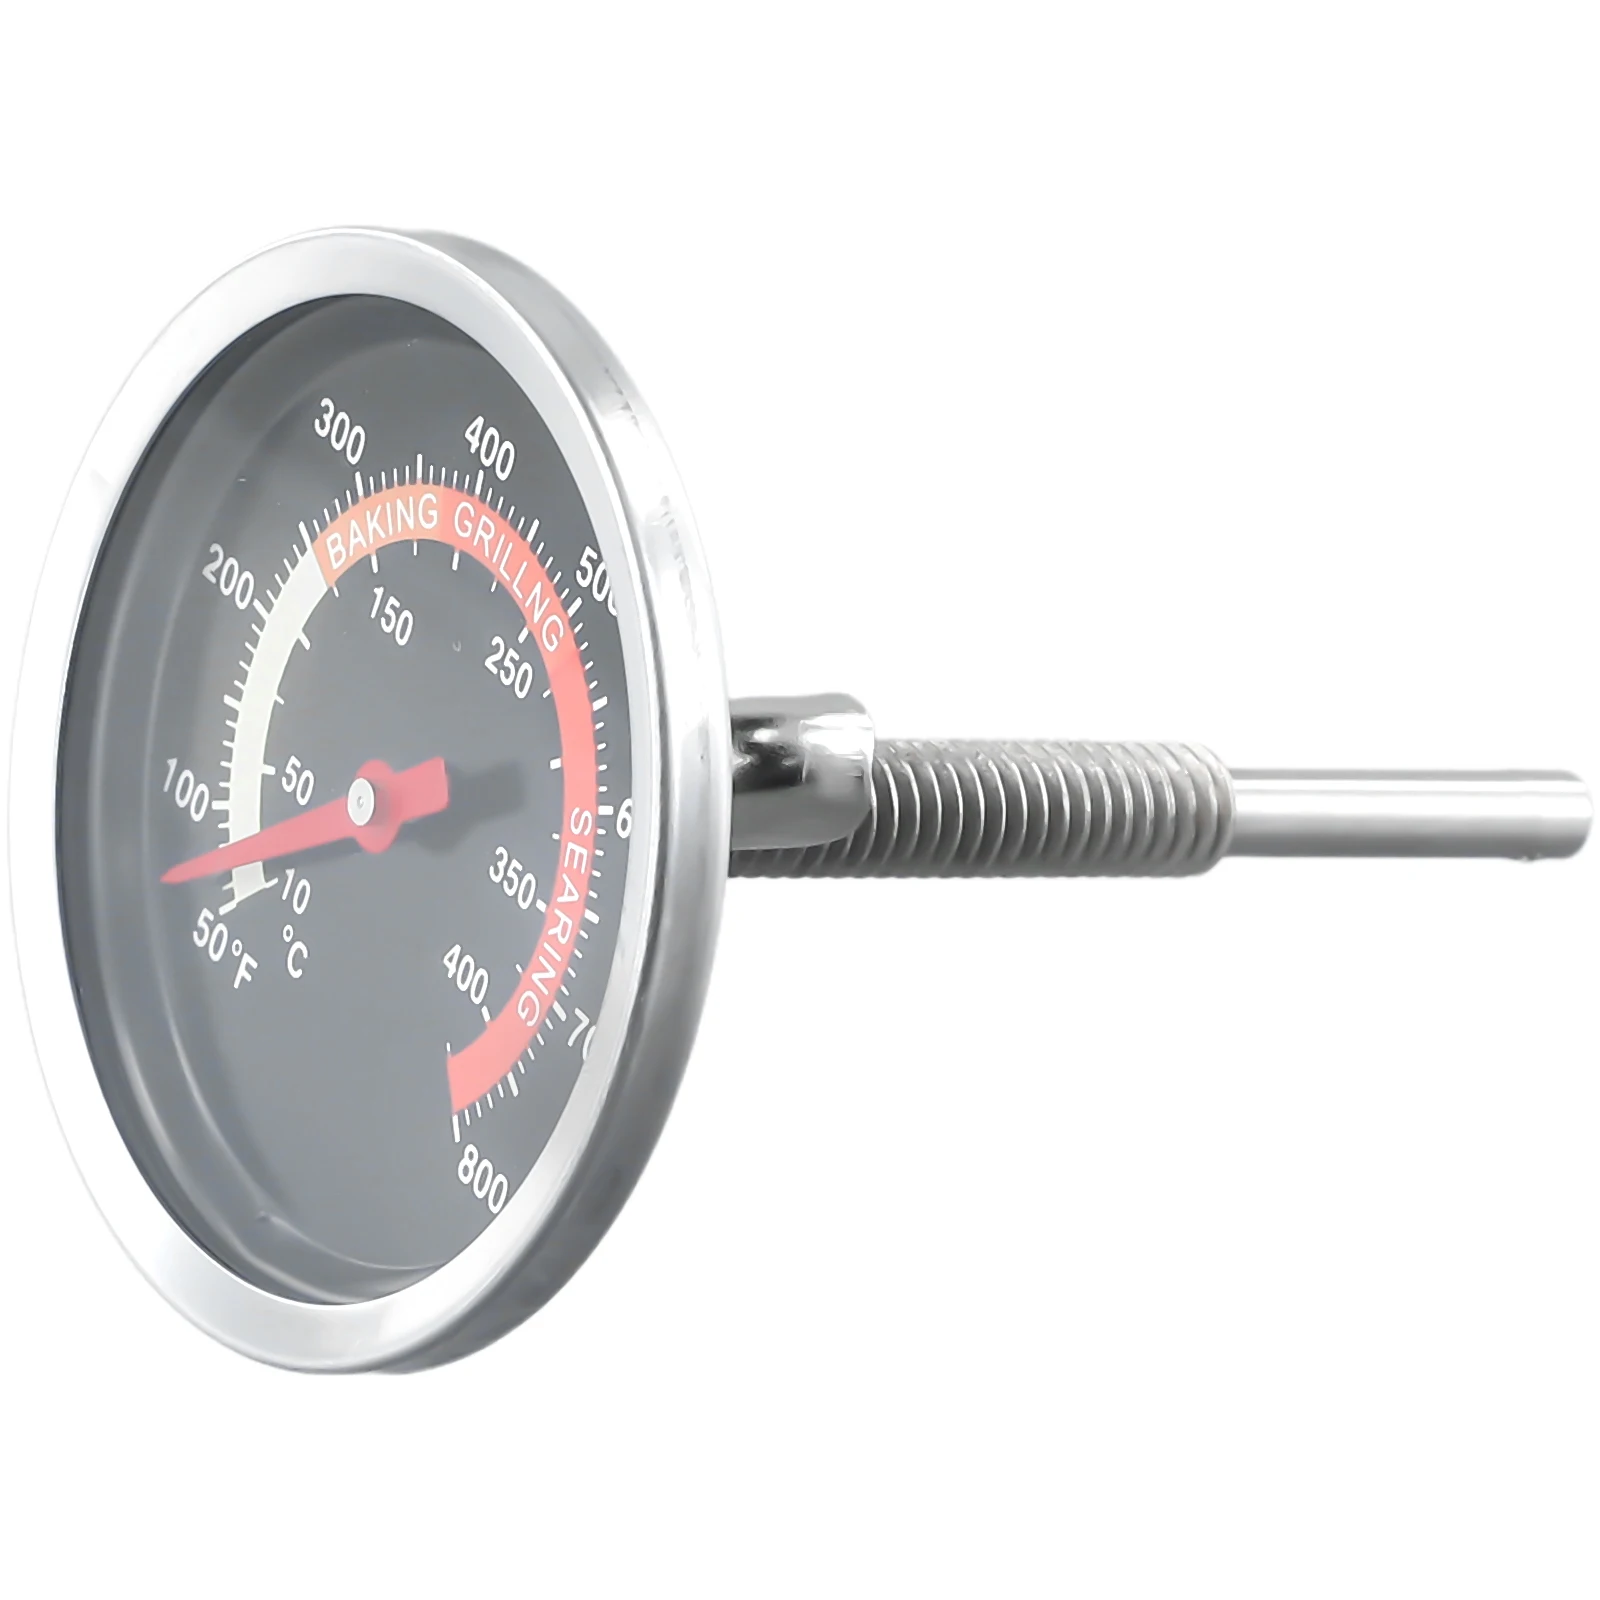 

Barbecue Thermometer Oven Temp Gauge 10~400℃ /50℉~800 ℉ BBQ Smoker Grill Temperature 6mm Rod 60 Mm/2.36in BBQ Tools Accessory